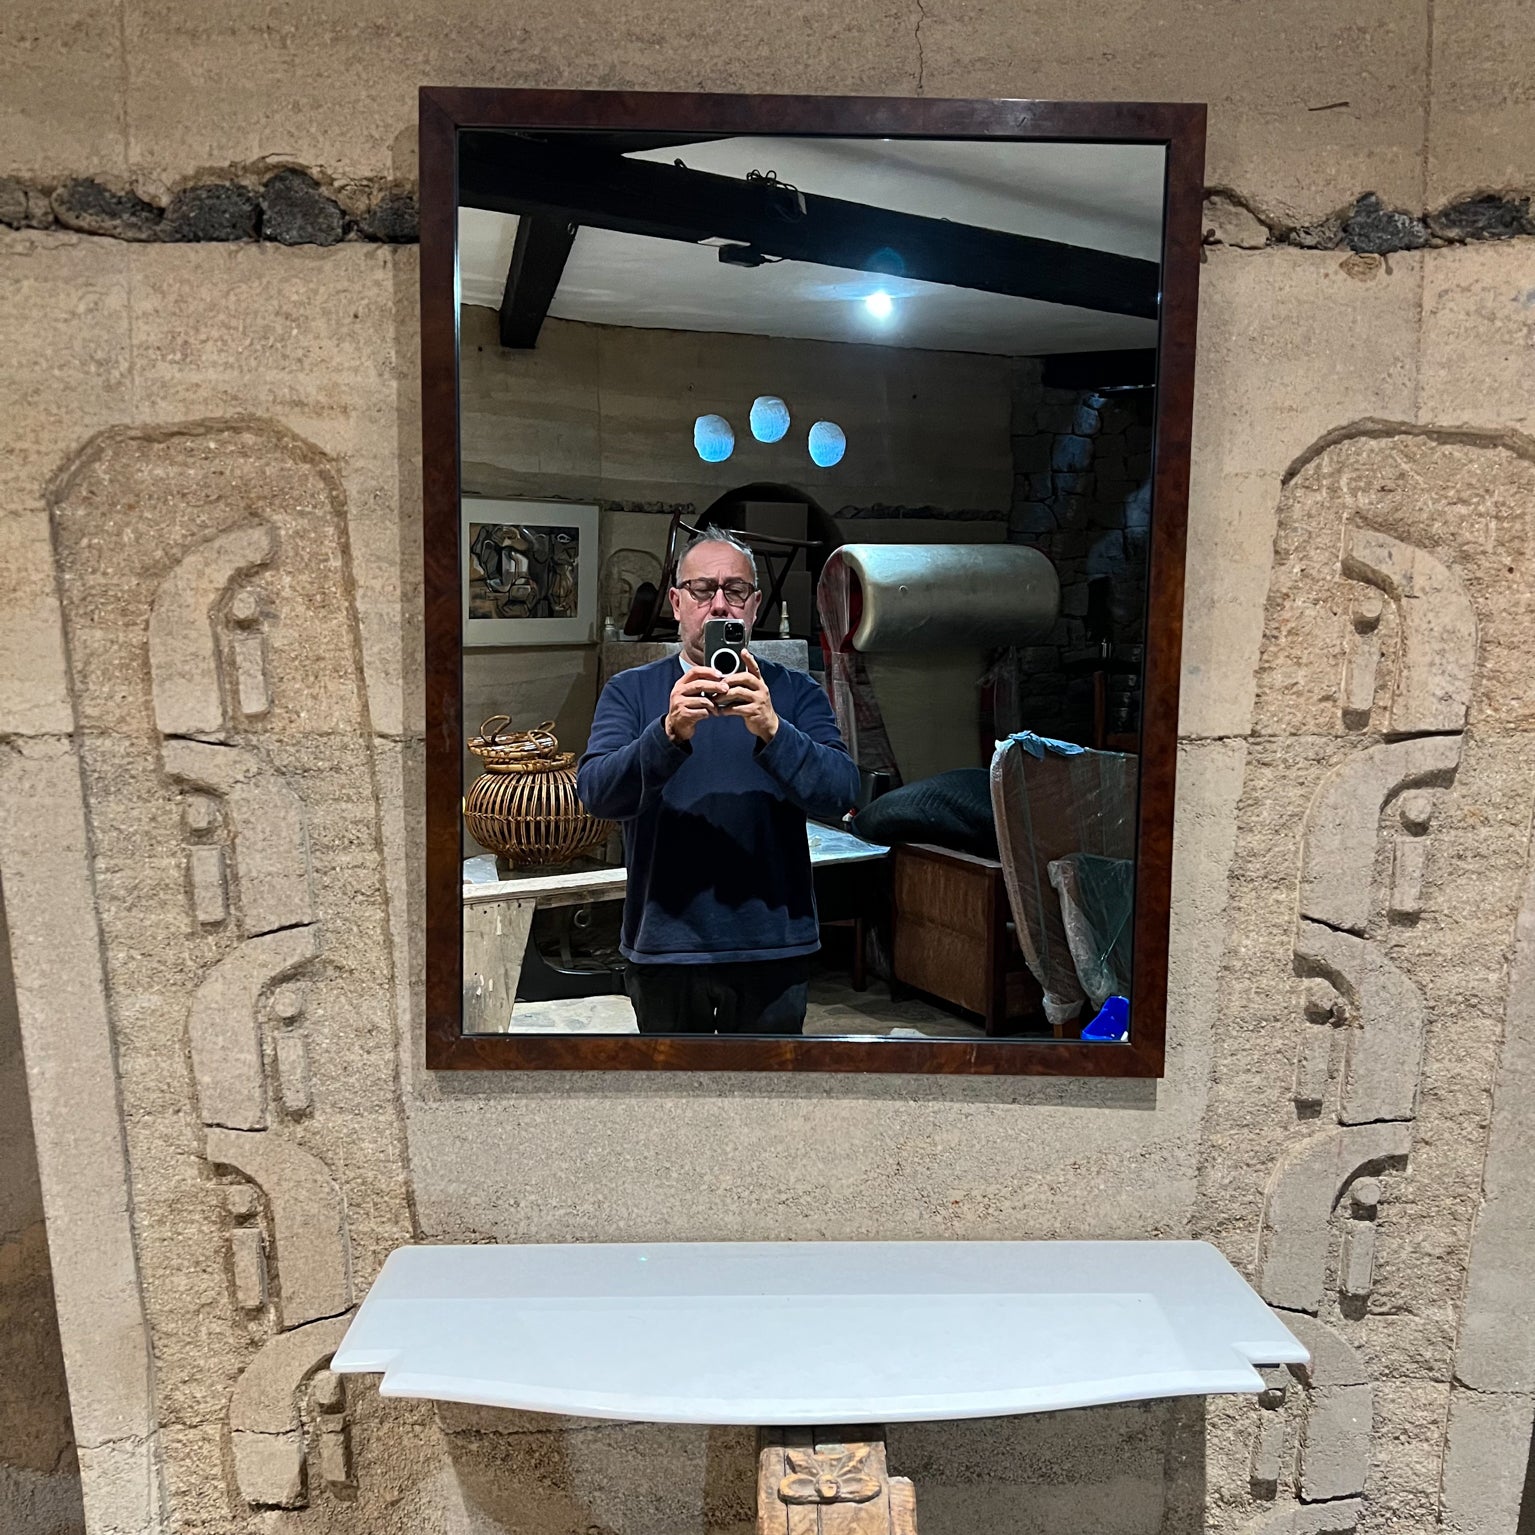 1970s Modern wall mirror framed in Burlwood Style of Milo Baughman
Unmarked
35.5 x 27.75 w x 1 thick
Preowned original vintage condition.
Refer to images provided
LA OC Palm Springs delivery.
 